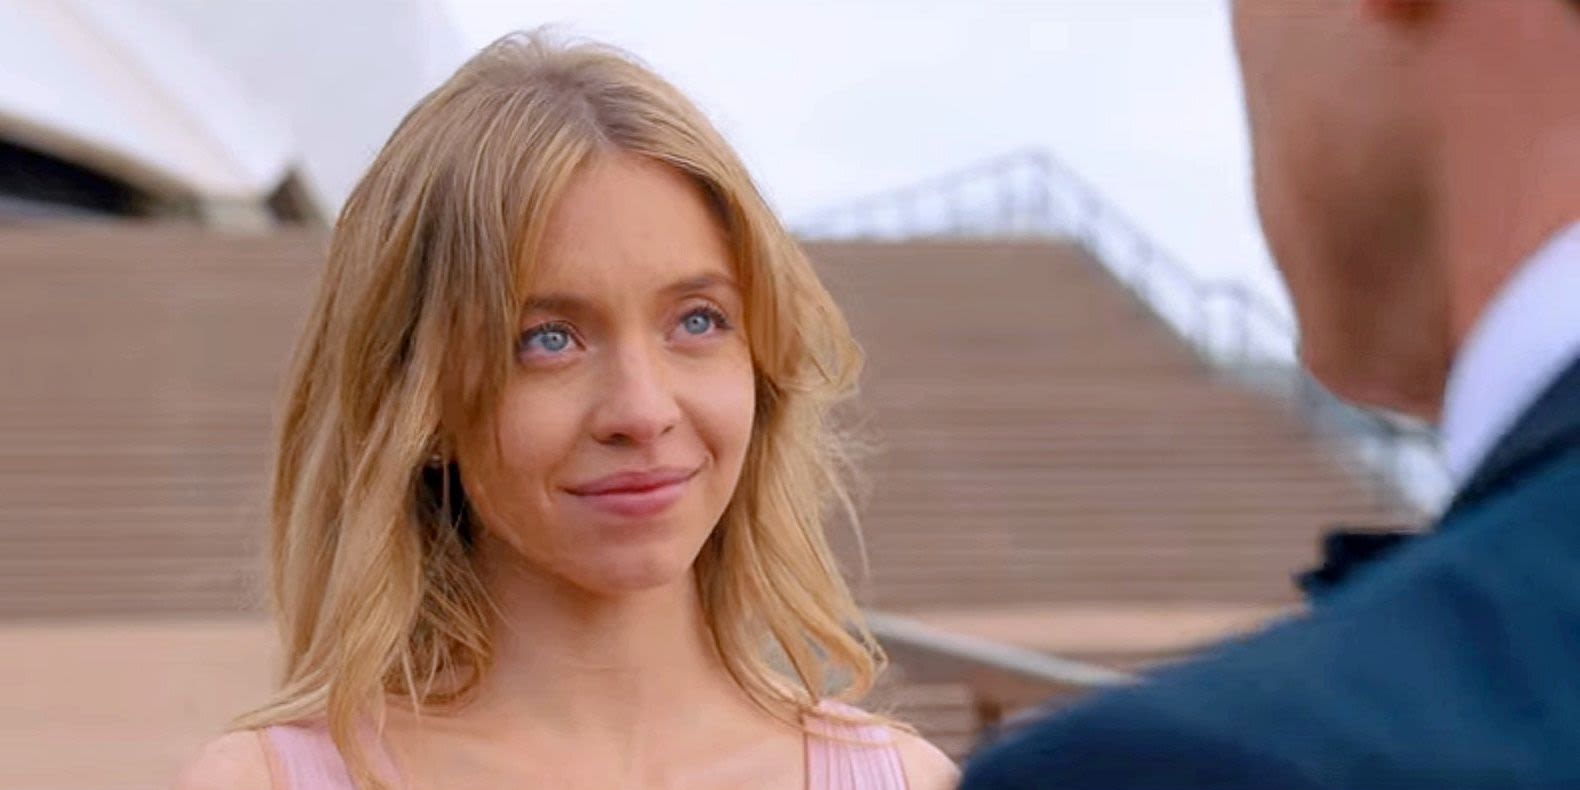 The True Story Behind Sydney Sweeney’s Most Shocking Anyone But You Scene Makes It Way Harder To Watch